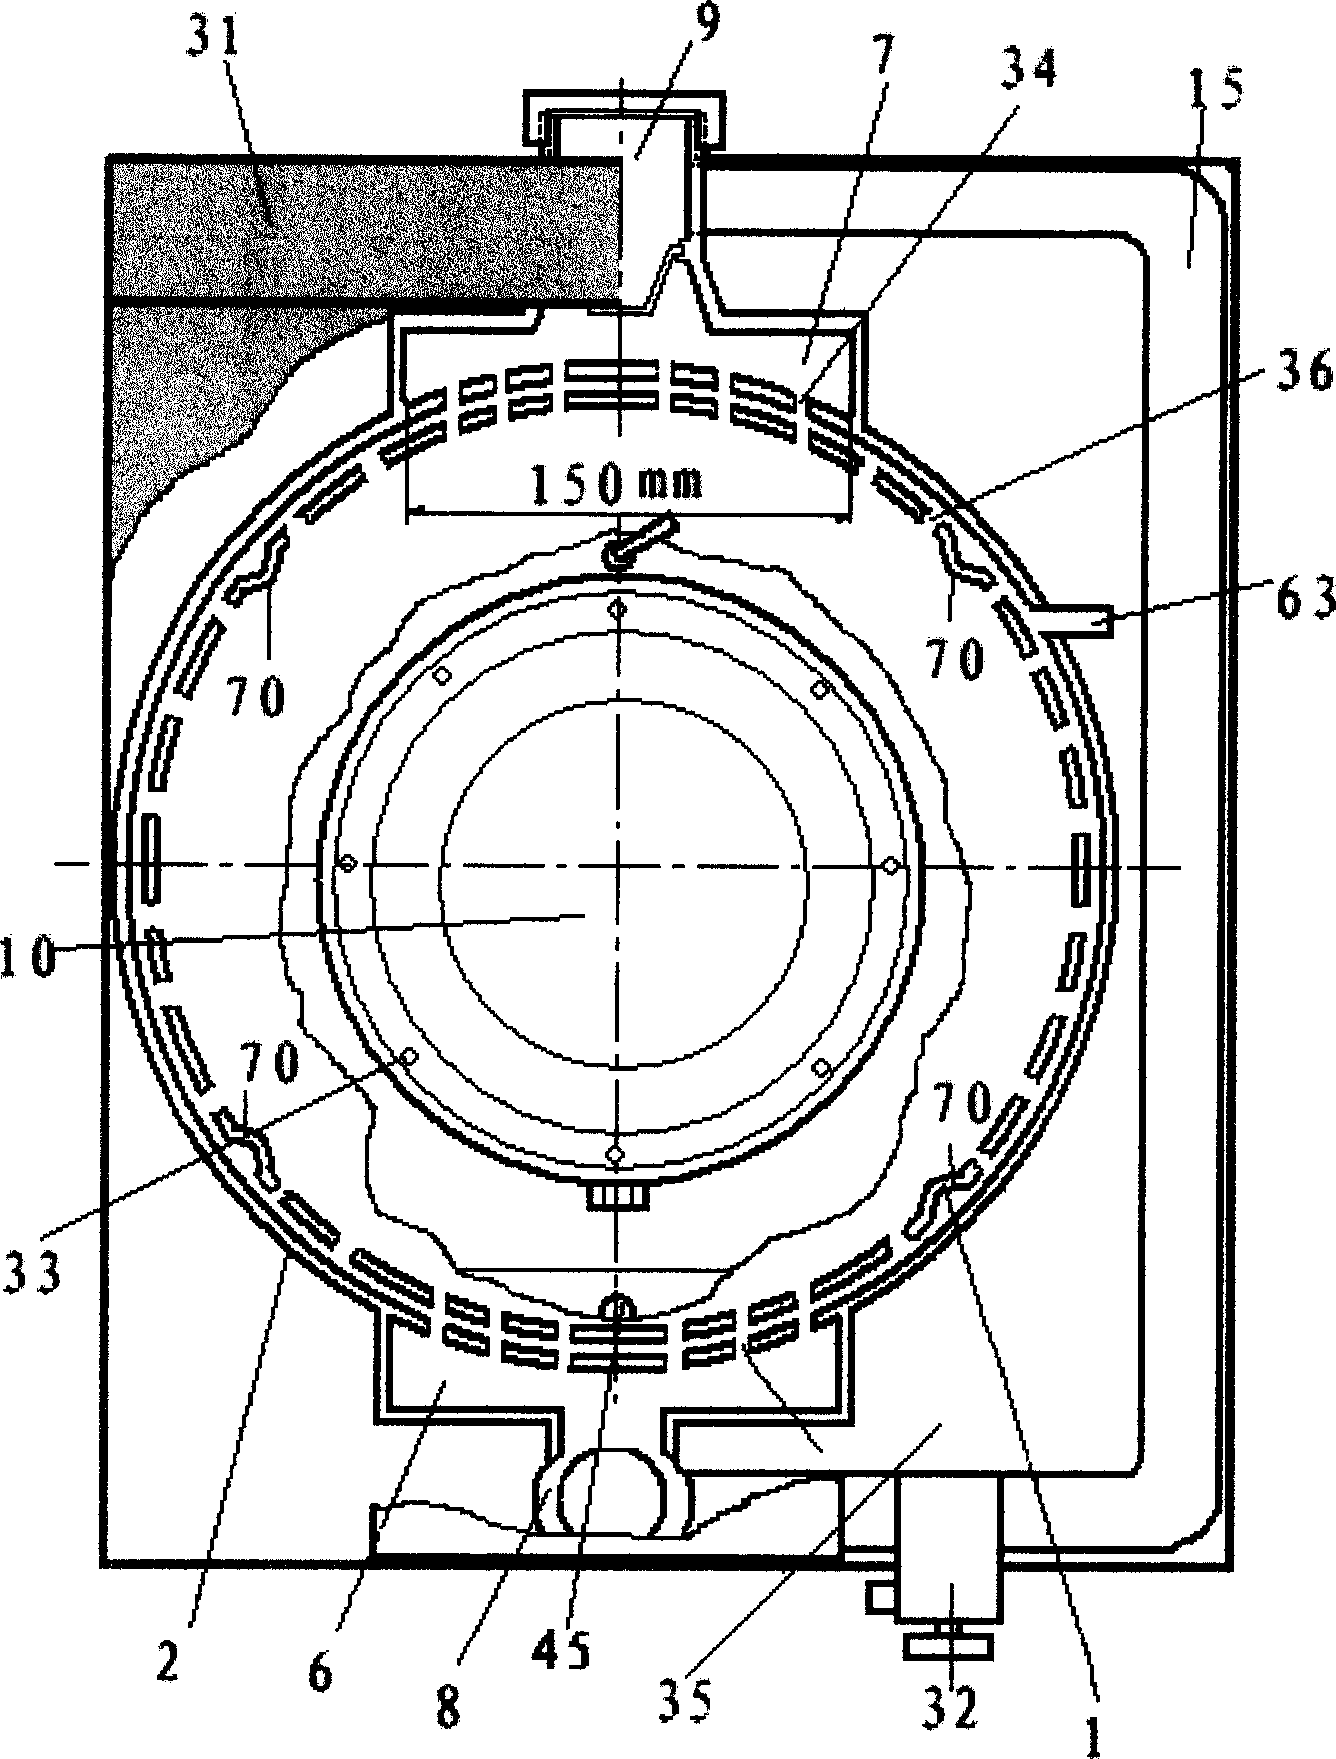 Pressure circulating washing machine with forced jet water flow